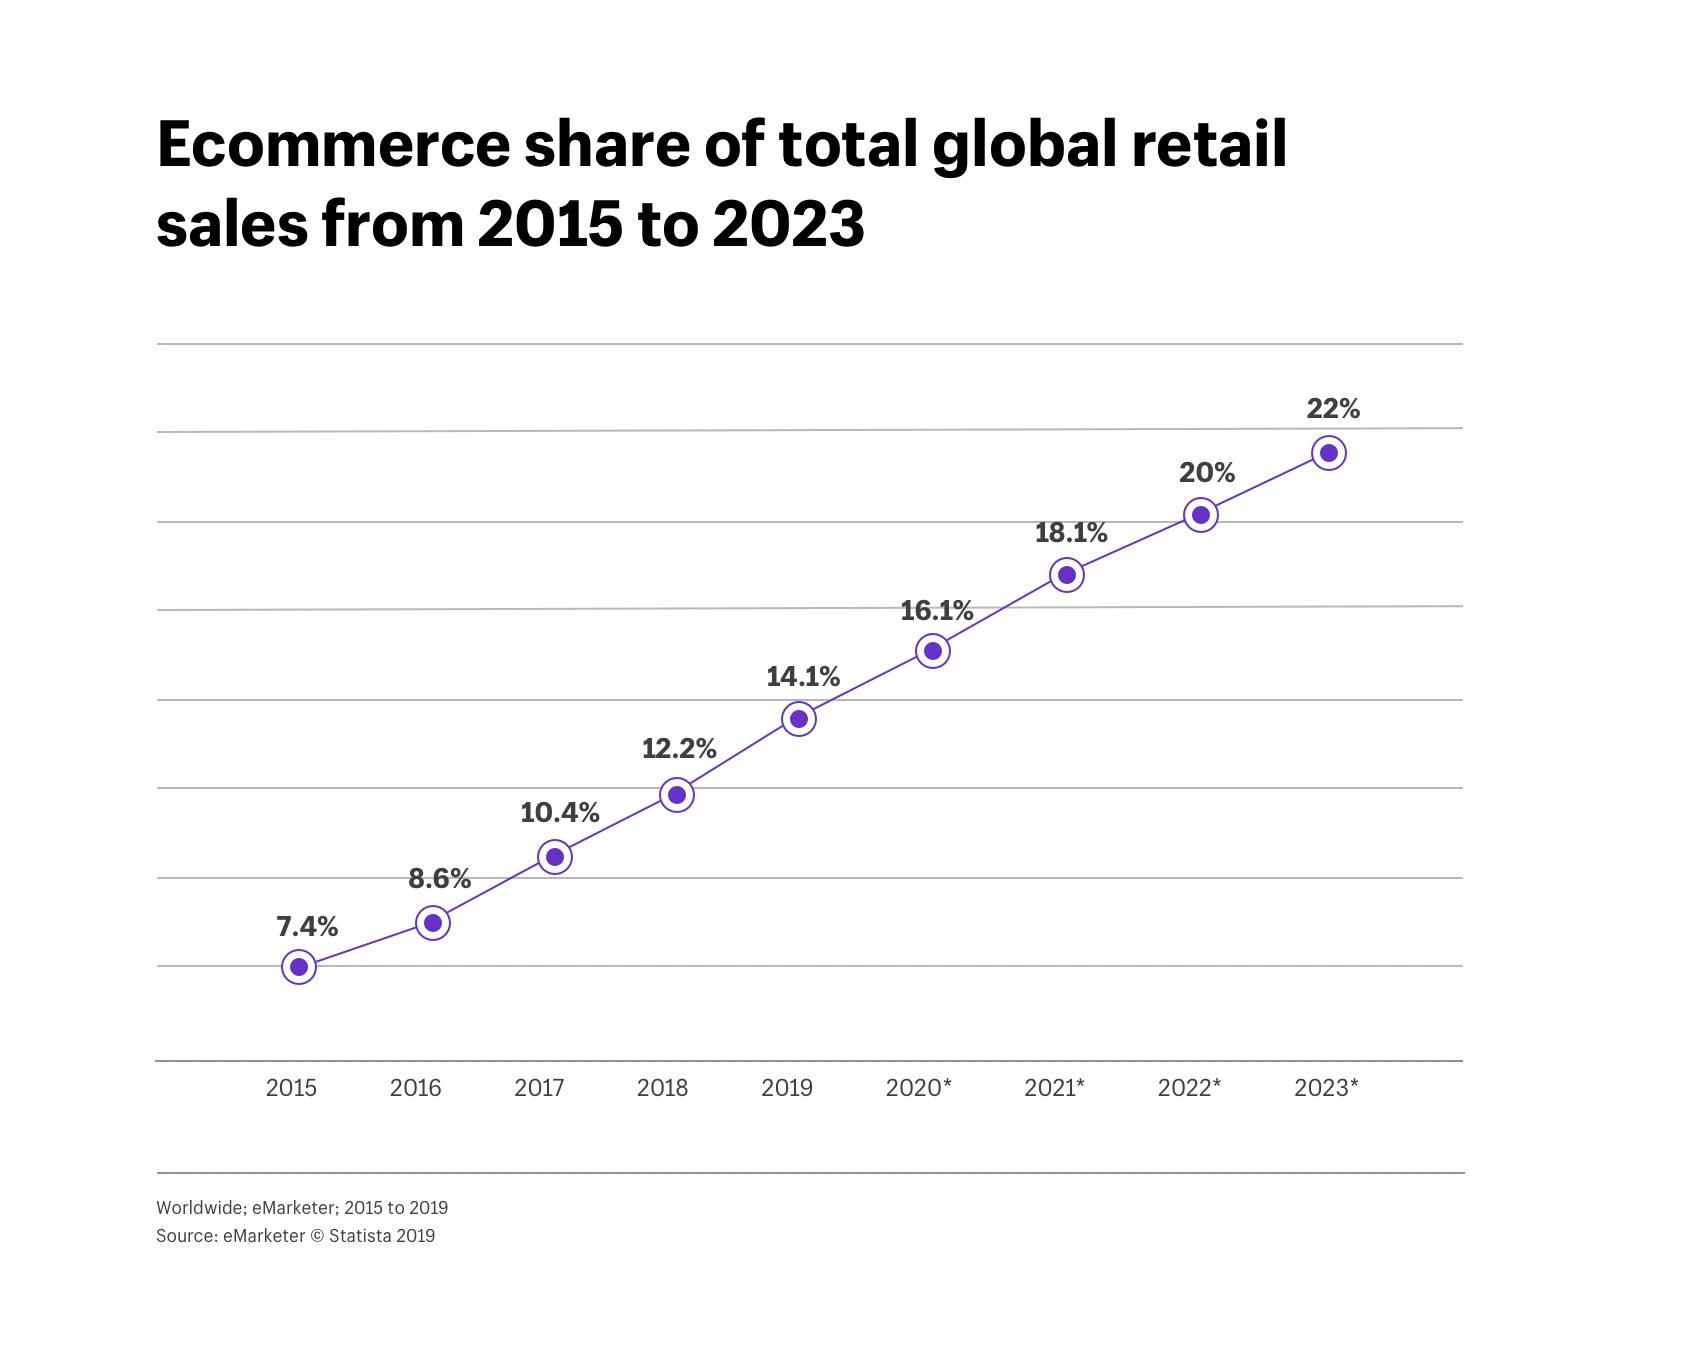 Ecommerce share of total global retail sales from 2015 to 2023